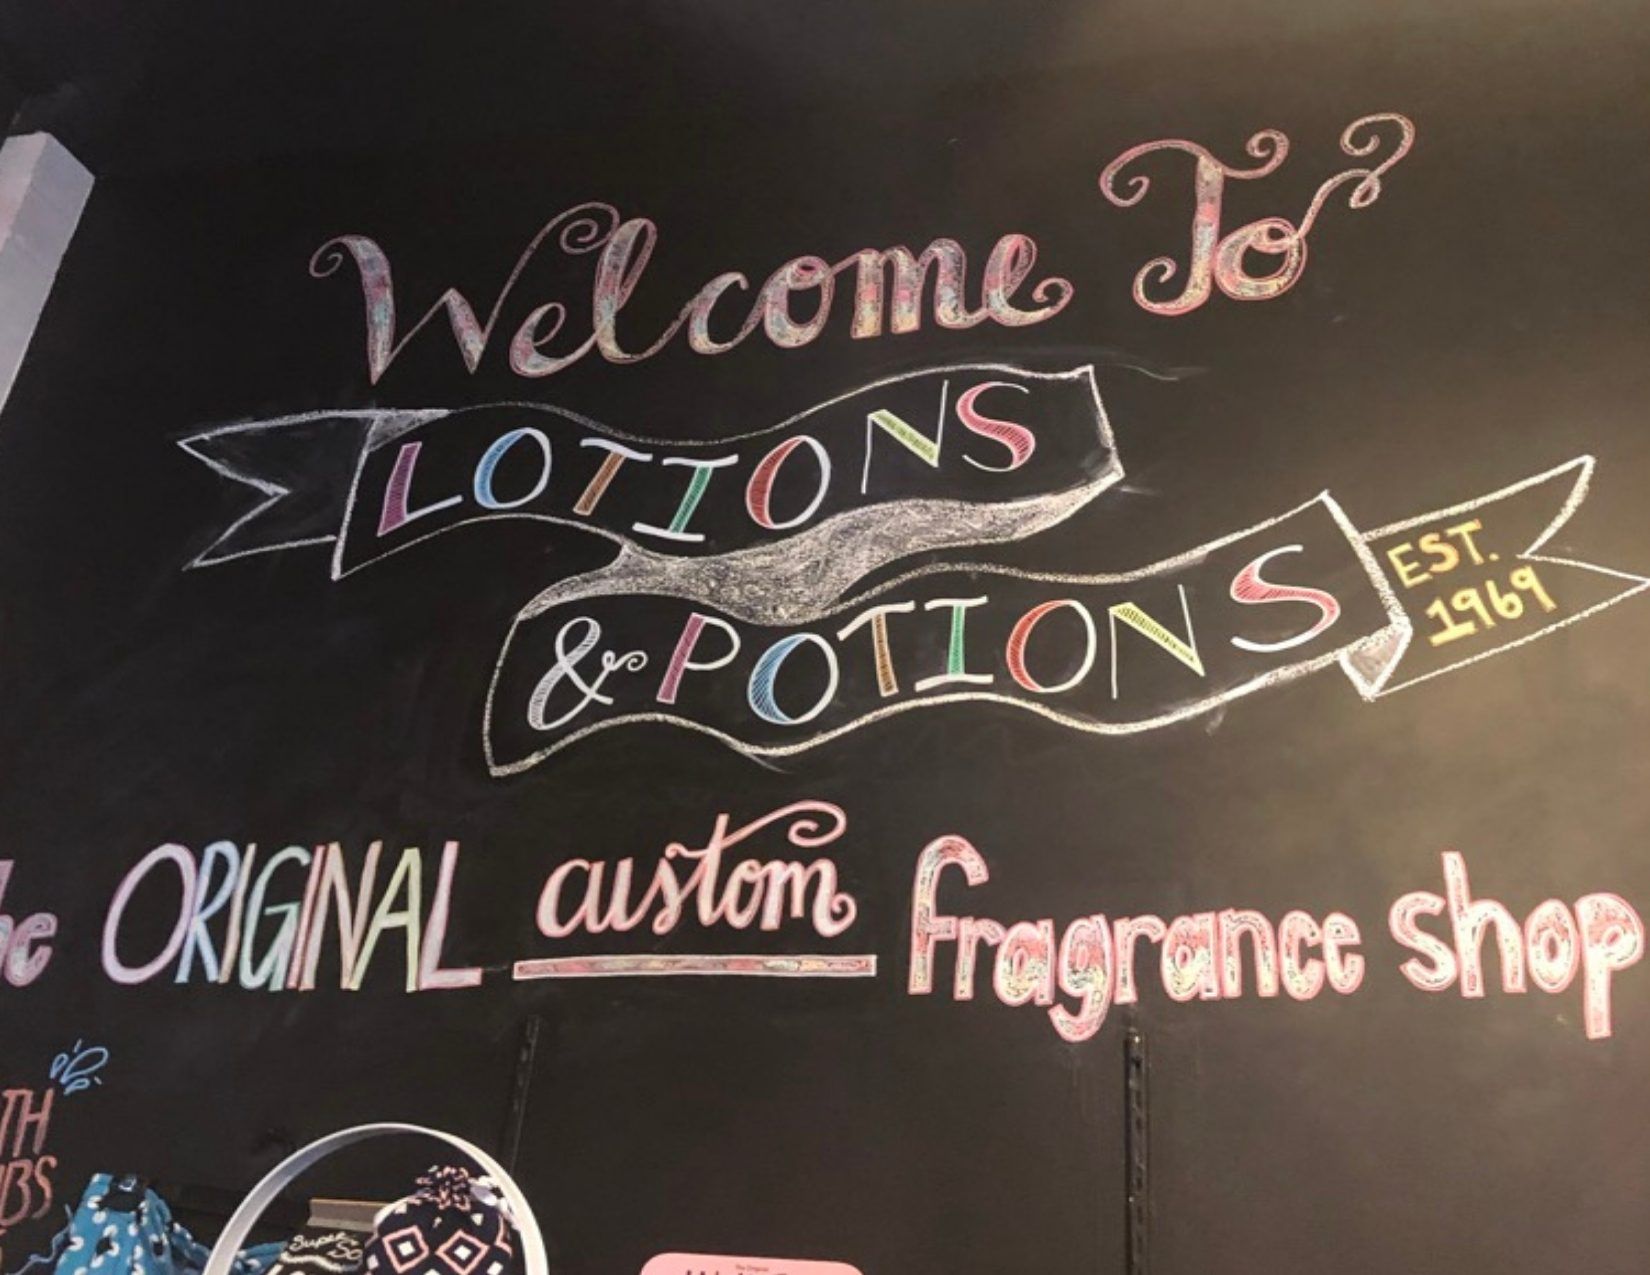 Calkboard sign saying Welcome to Lotions and Potions the Original Custom Fragrance Shop in Tempe Arizona